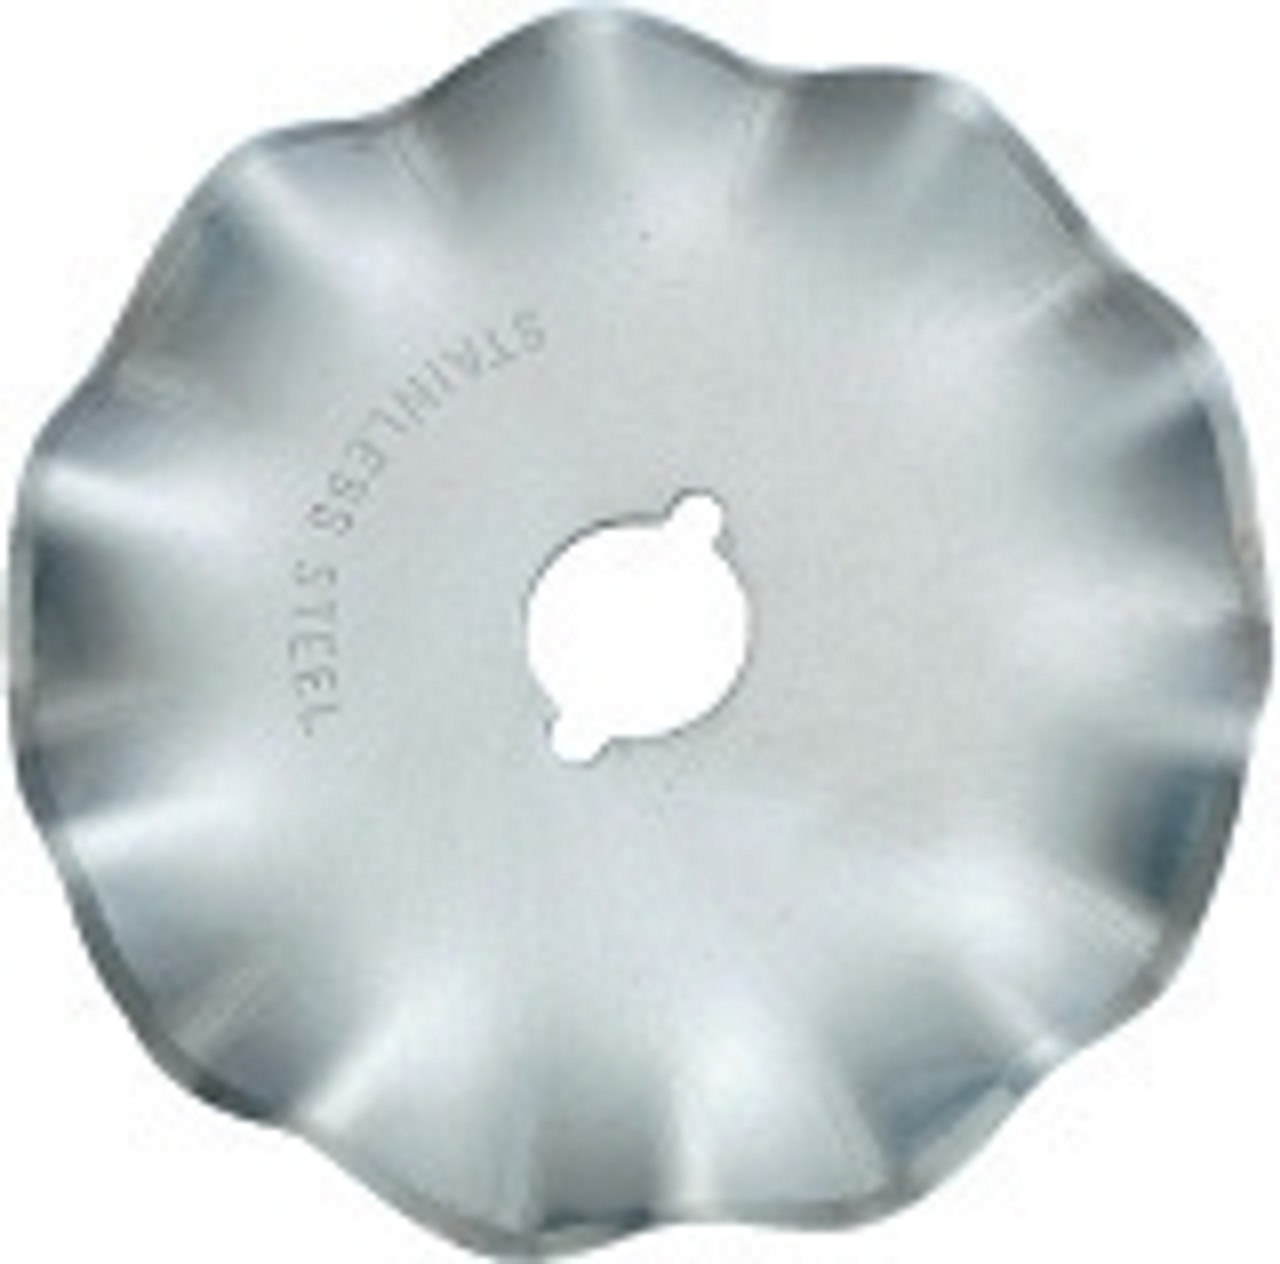 Decorative rotary cutter blades for fun, quick and easy edge finishes